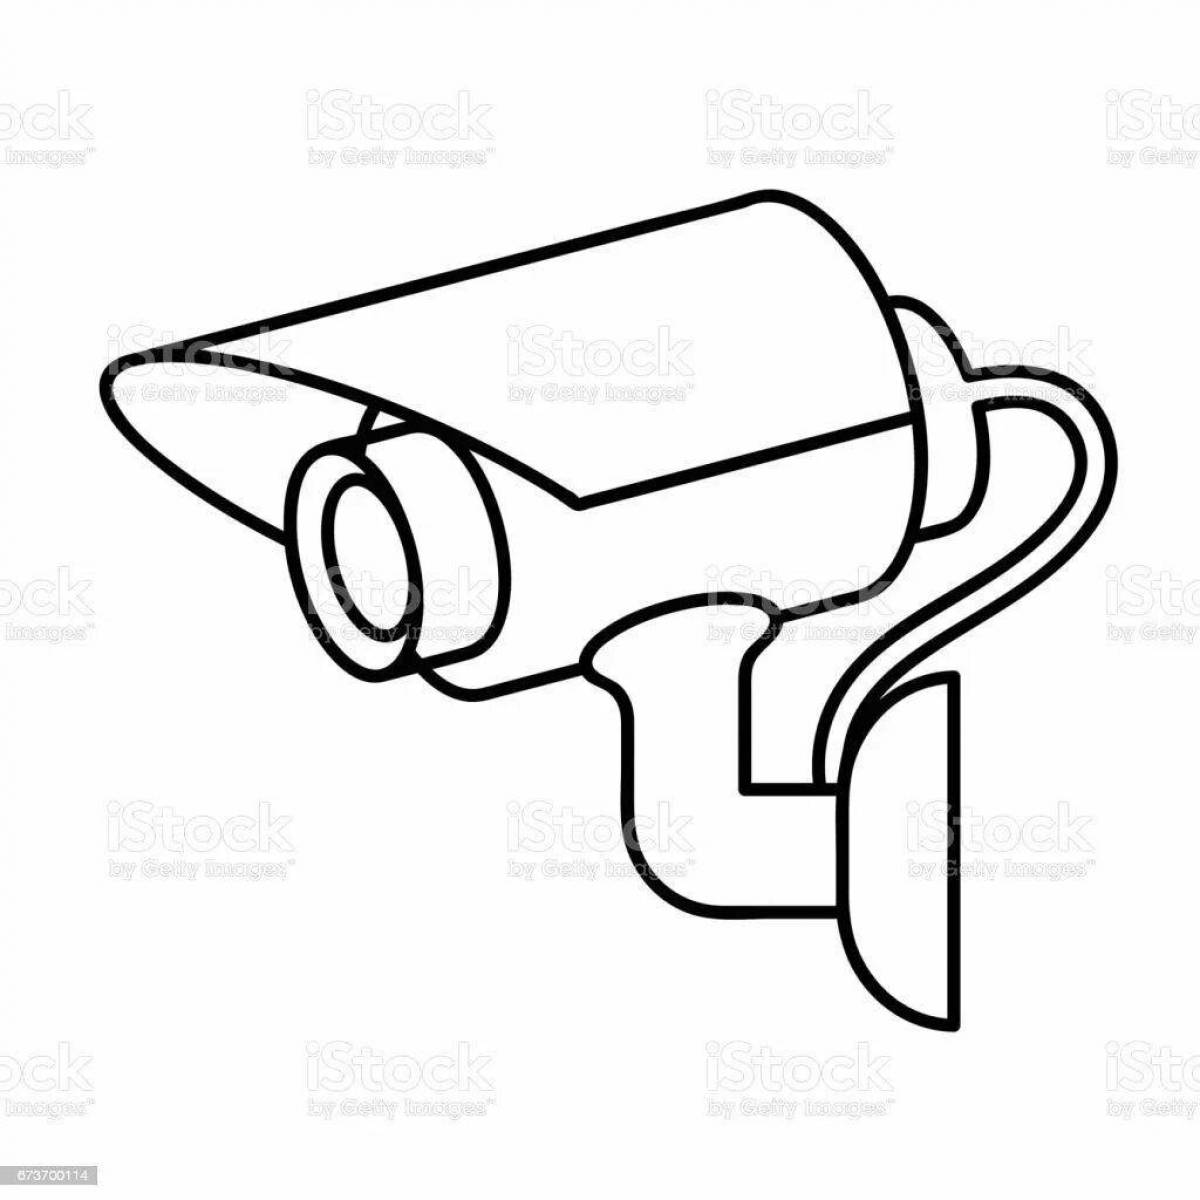 Coloring page of a video camera